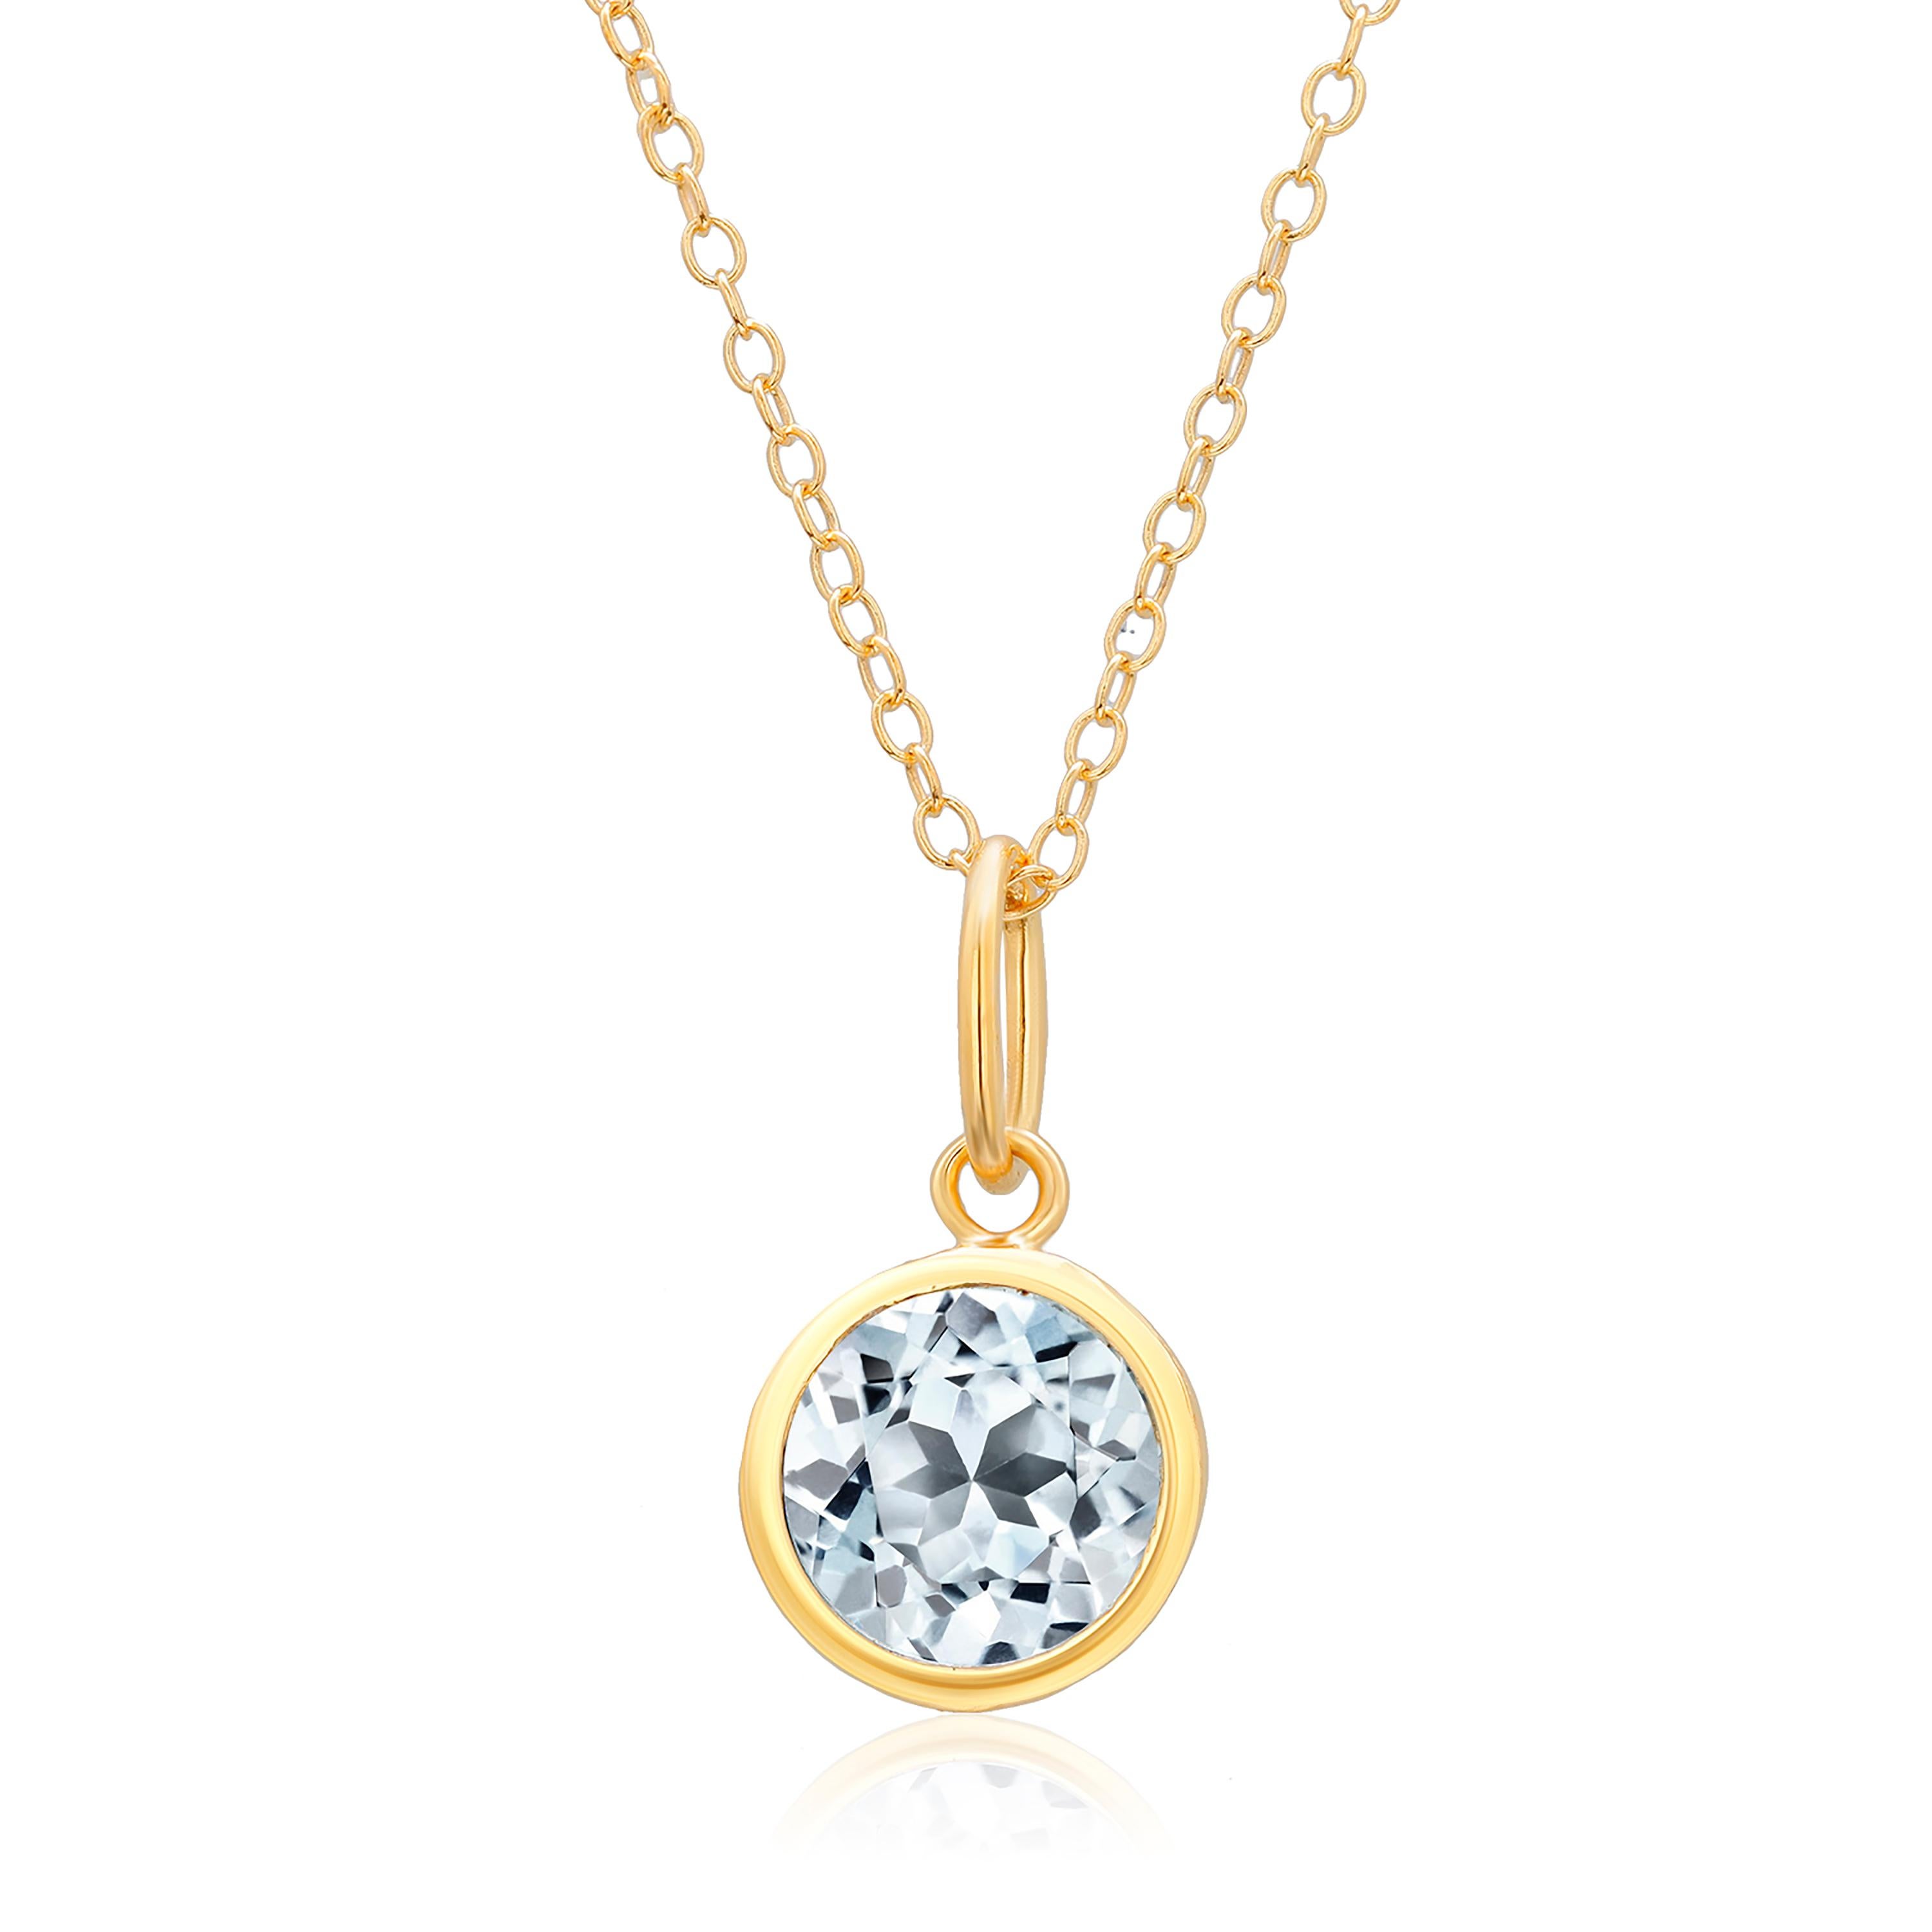 Round Cut Round Blue Topaz Bezel Set Silver Pendant Necklace Yellow Gold-Plated